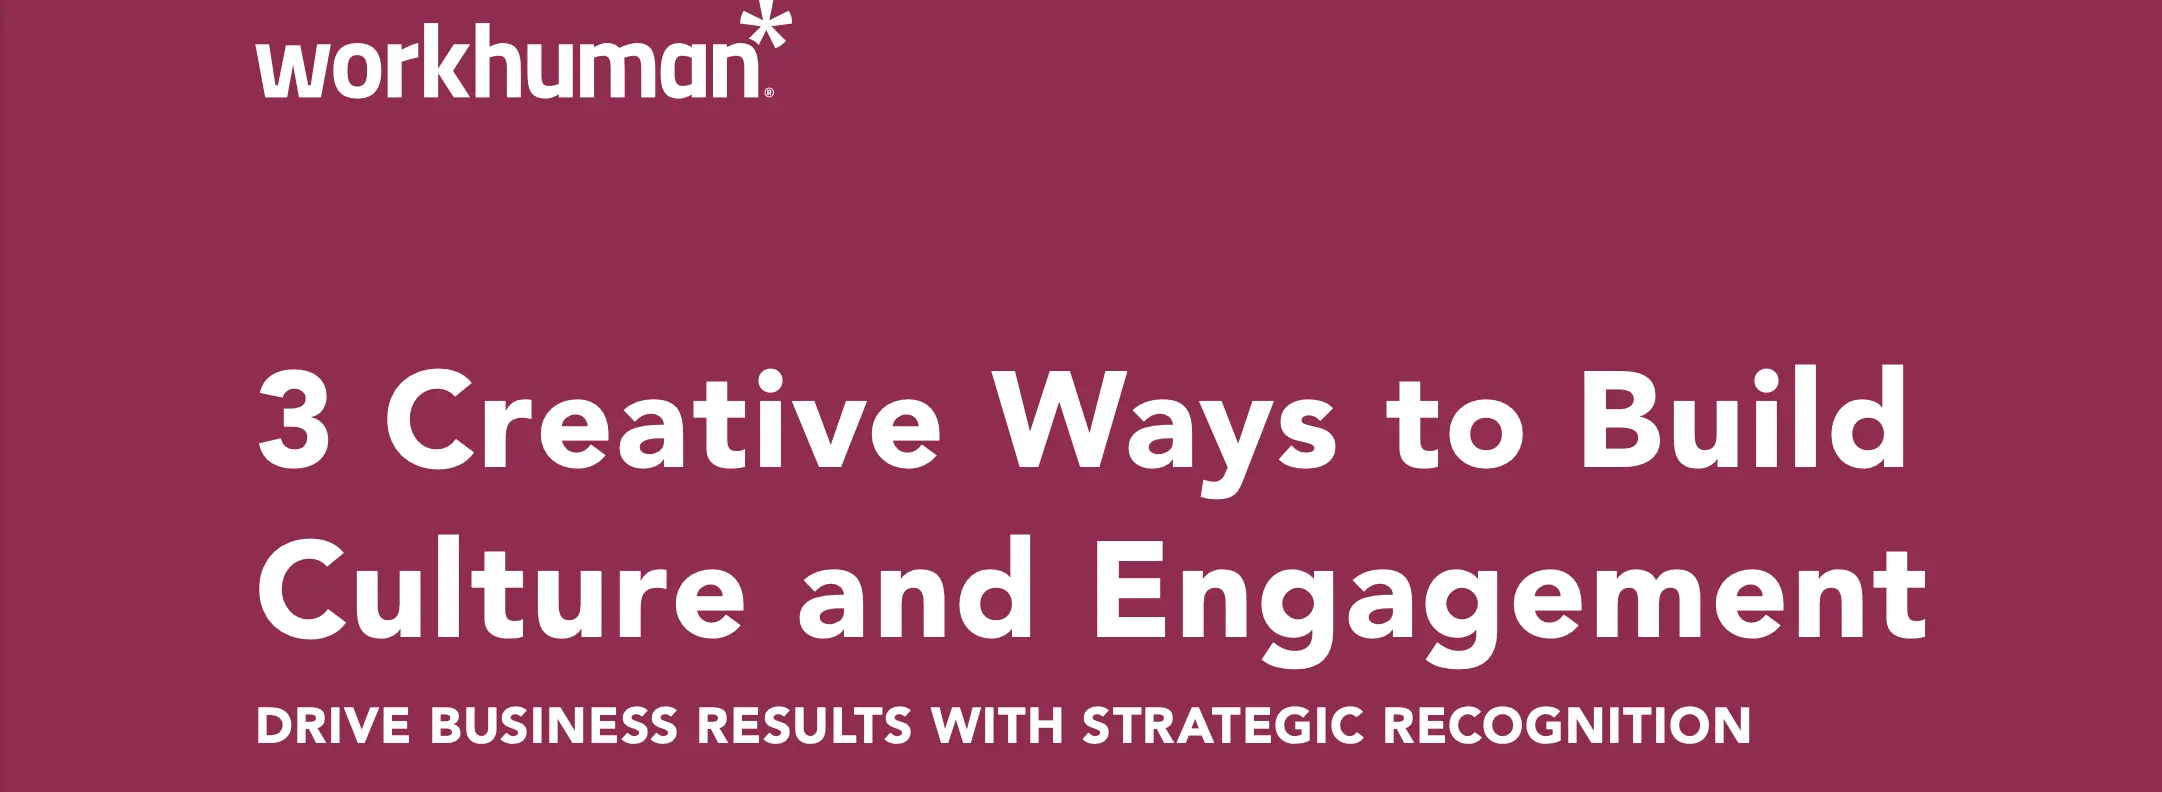 3 Creative Ways to Build Culture and Engagement_FeatureImage